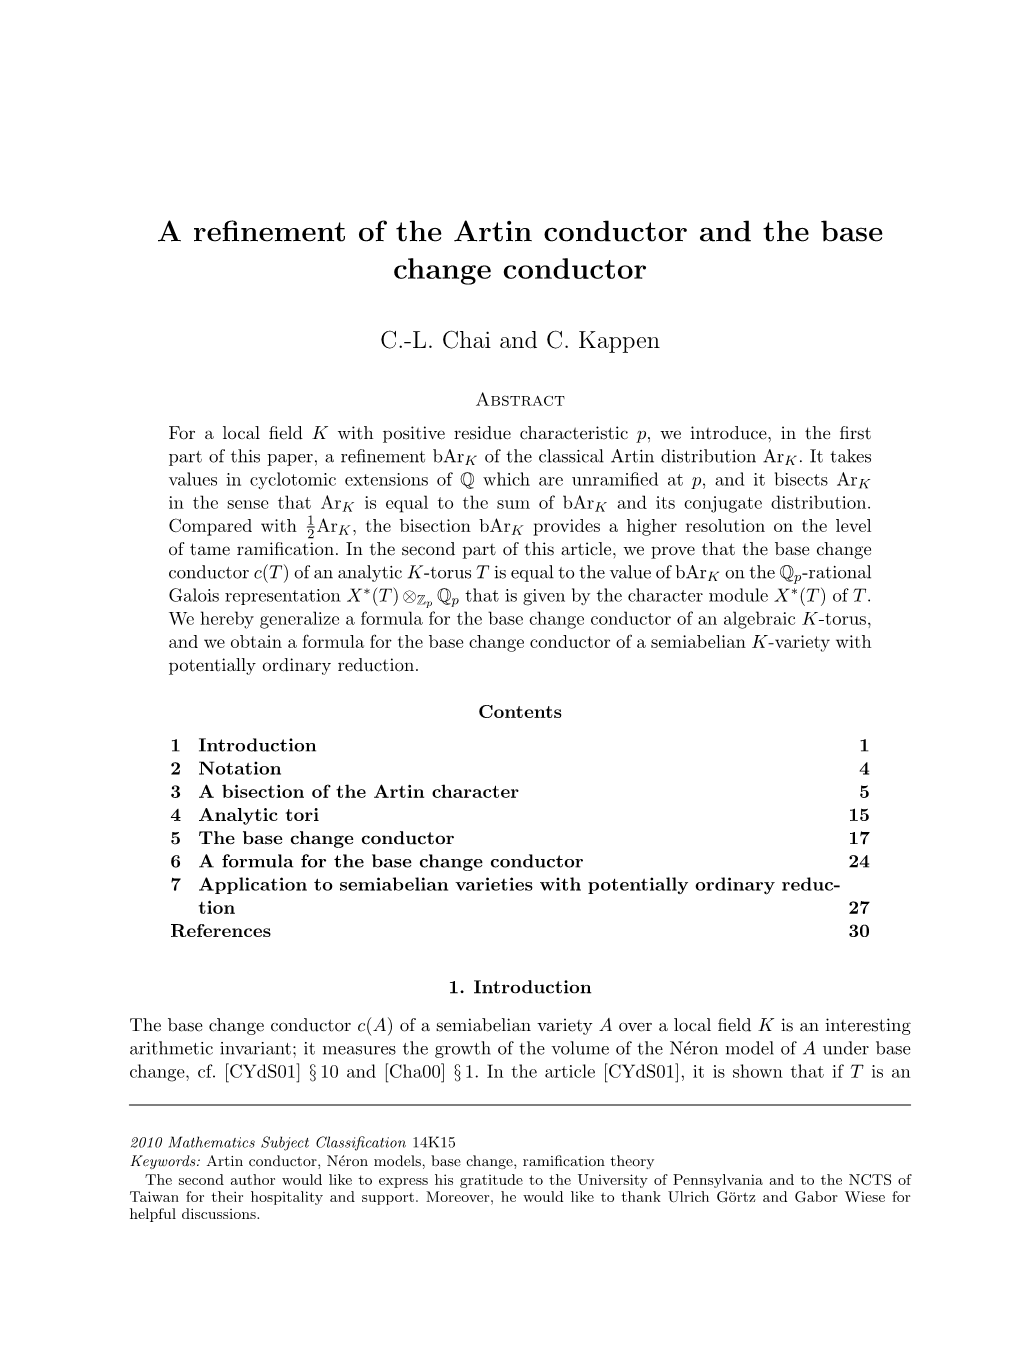 A Refinement of the Artin Conductor and the Base Change Conductor